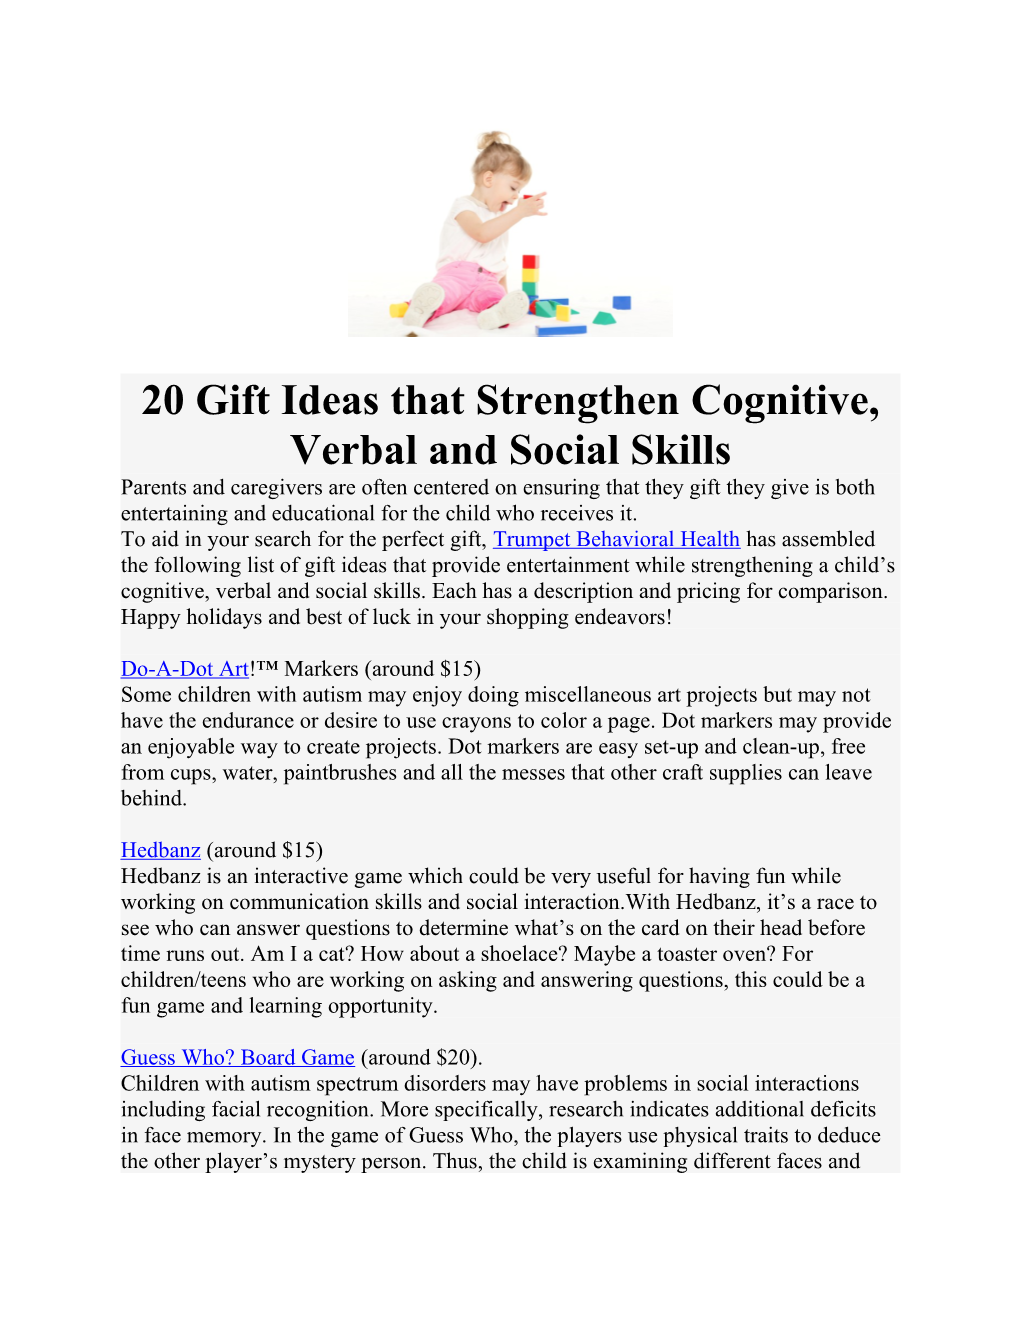 20 Gift Ideas That Strengthen Cognitive, Verbal and Social Skills